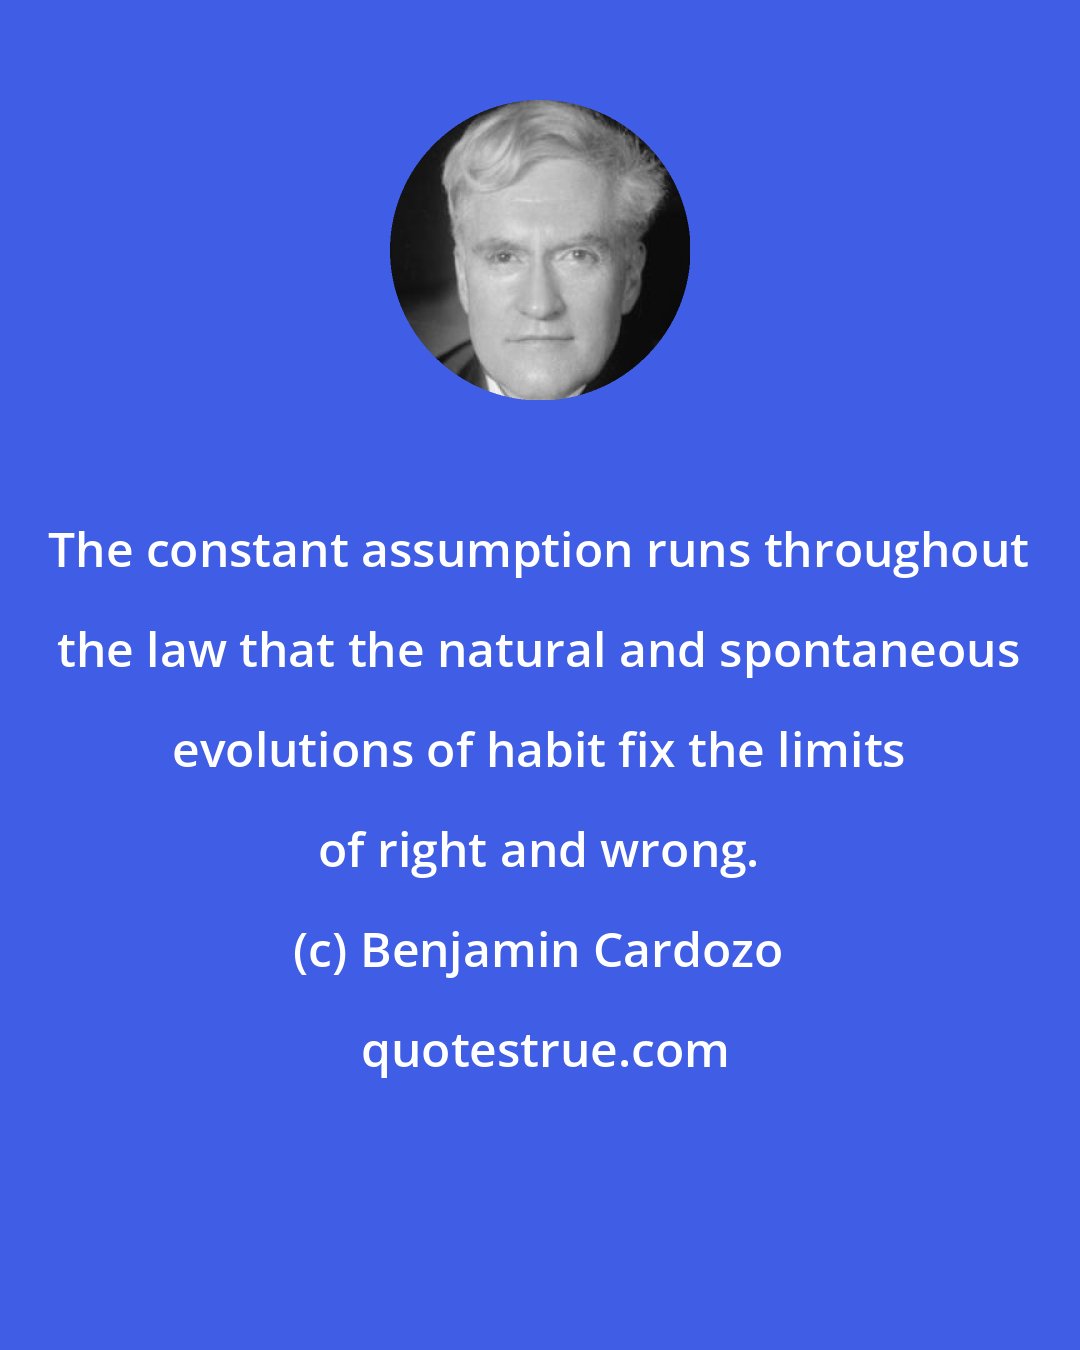 Benjamin Cardozo: The constant assumption runs throughout the law that the natural and spontaneous evolutions of habit fix the limits of right and wrong.